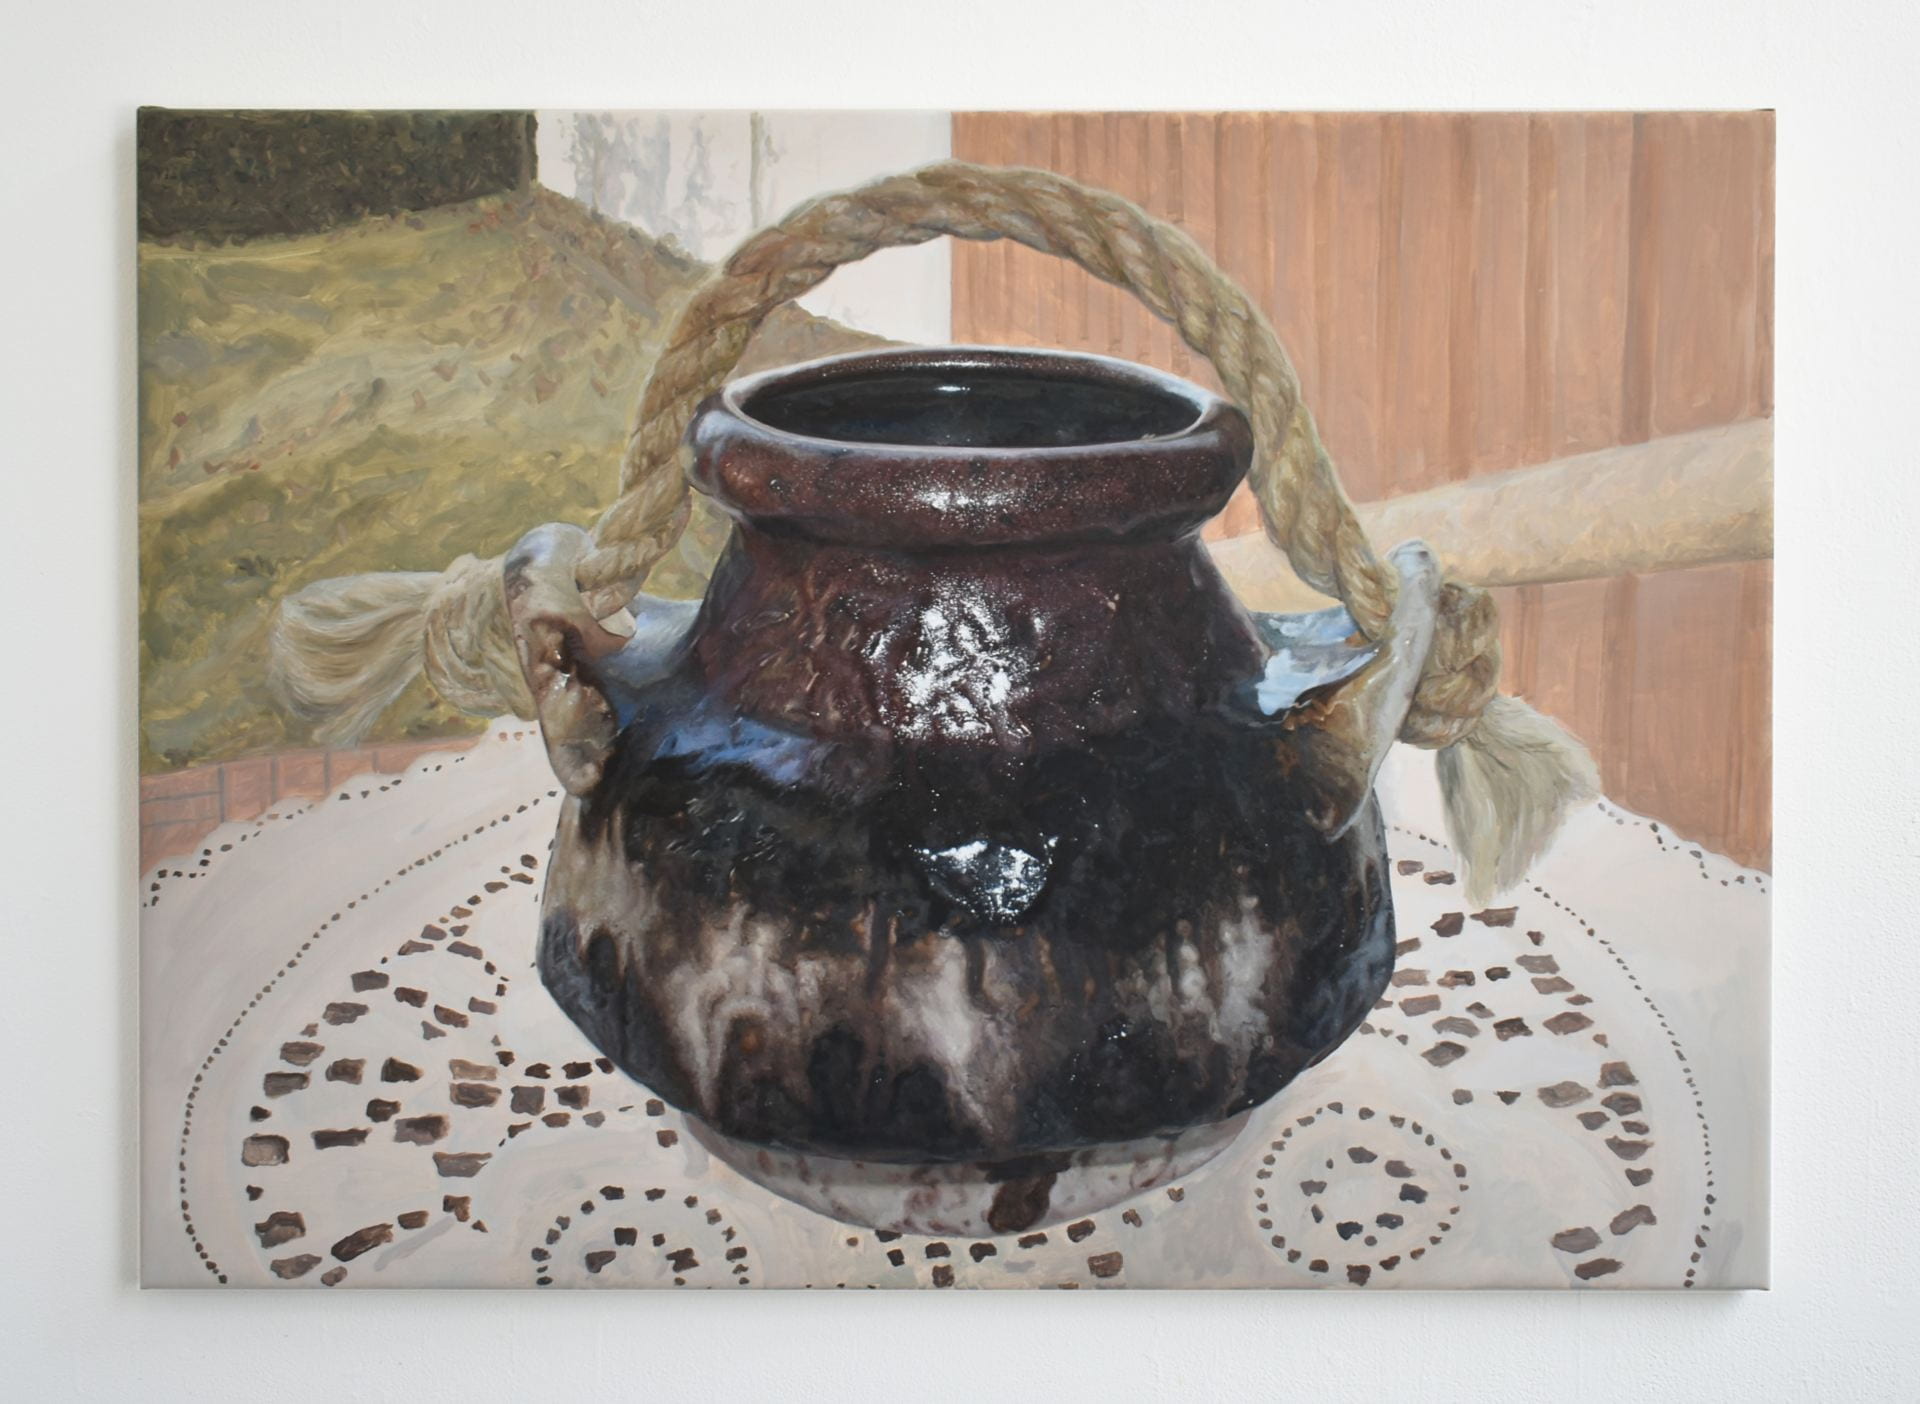 A painting of a vase, seated on a table in someone's back yard. It has the bright white reflection of a camera flash reflecting off the dark, gory glaze.